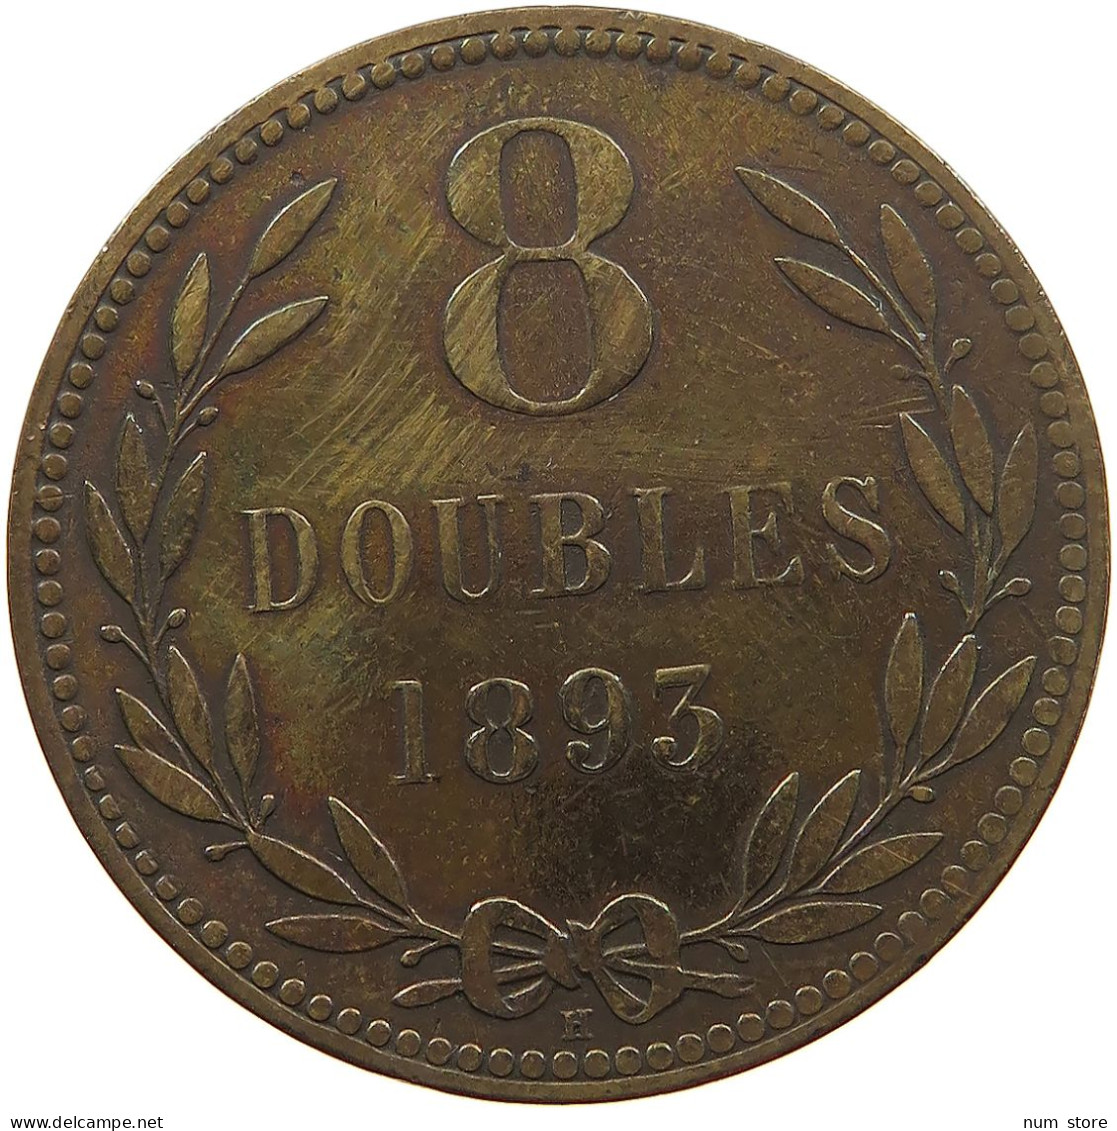 GUERNSEY 8 DOUBLES 1893  #s075 0581 - Guernesey